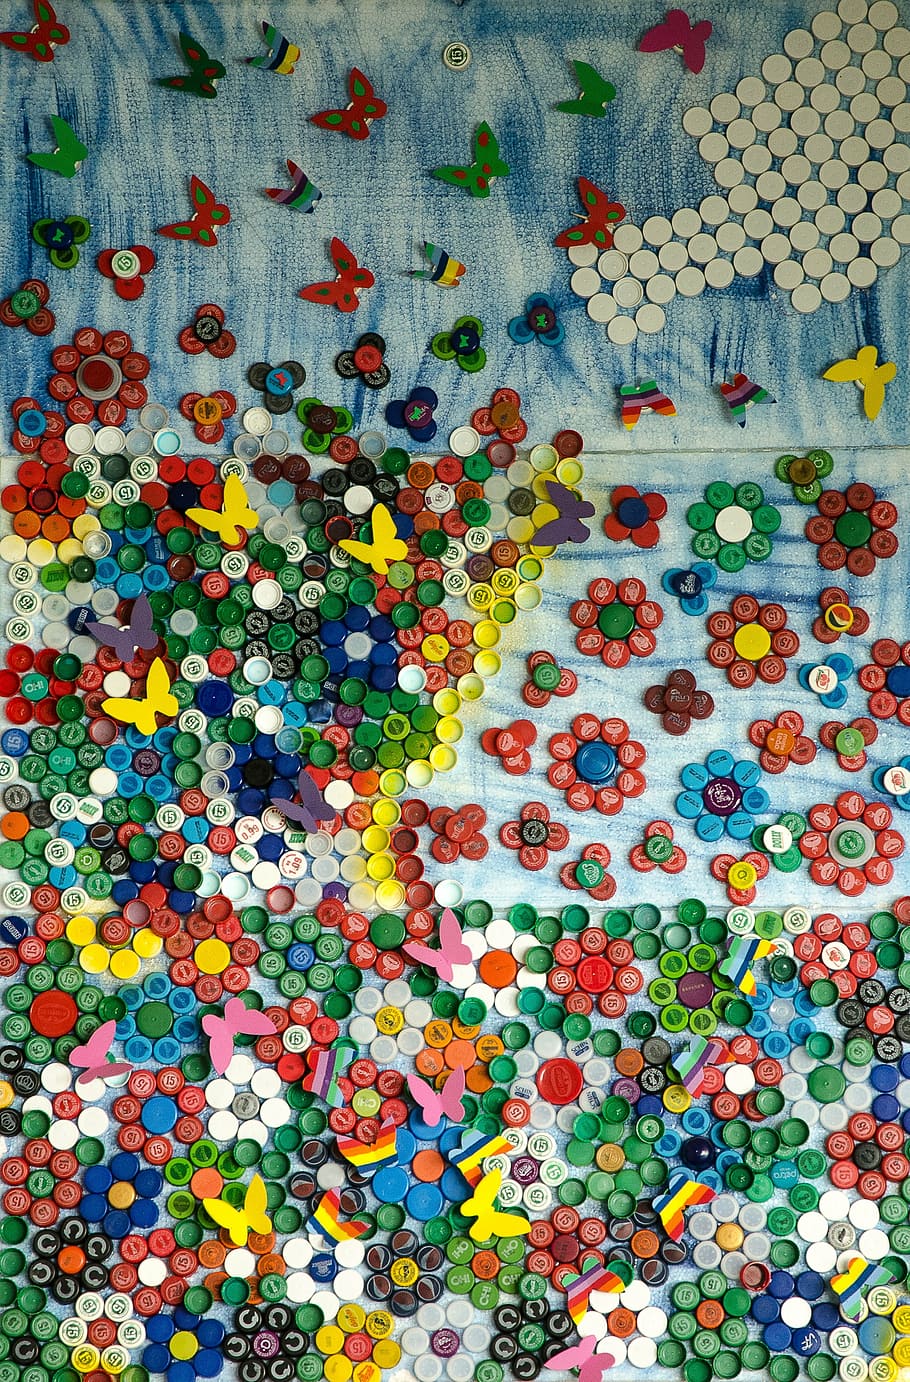 assembly, frame, caps, art, texture, pattern, decoration, backgrounds, multi Colored, flower